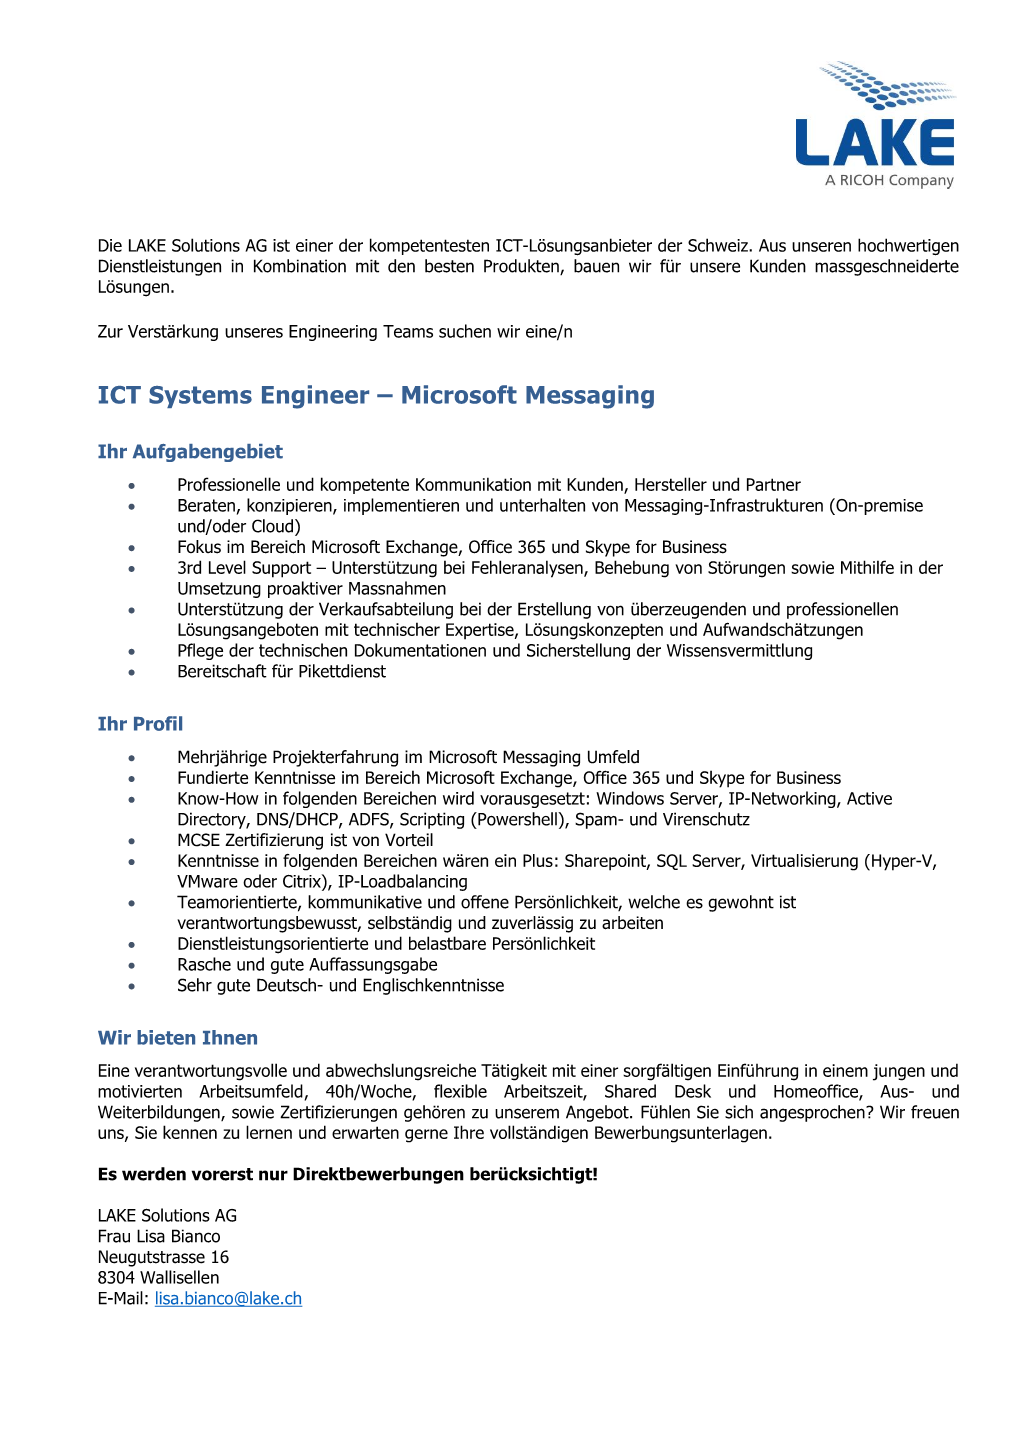 ICT Systems Engineer – Microsoft Messaging